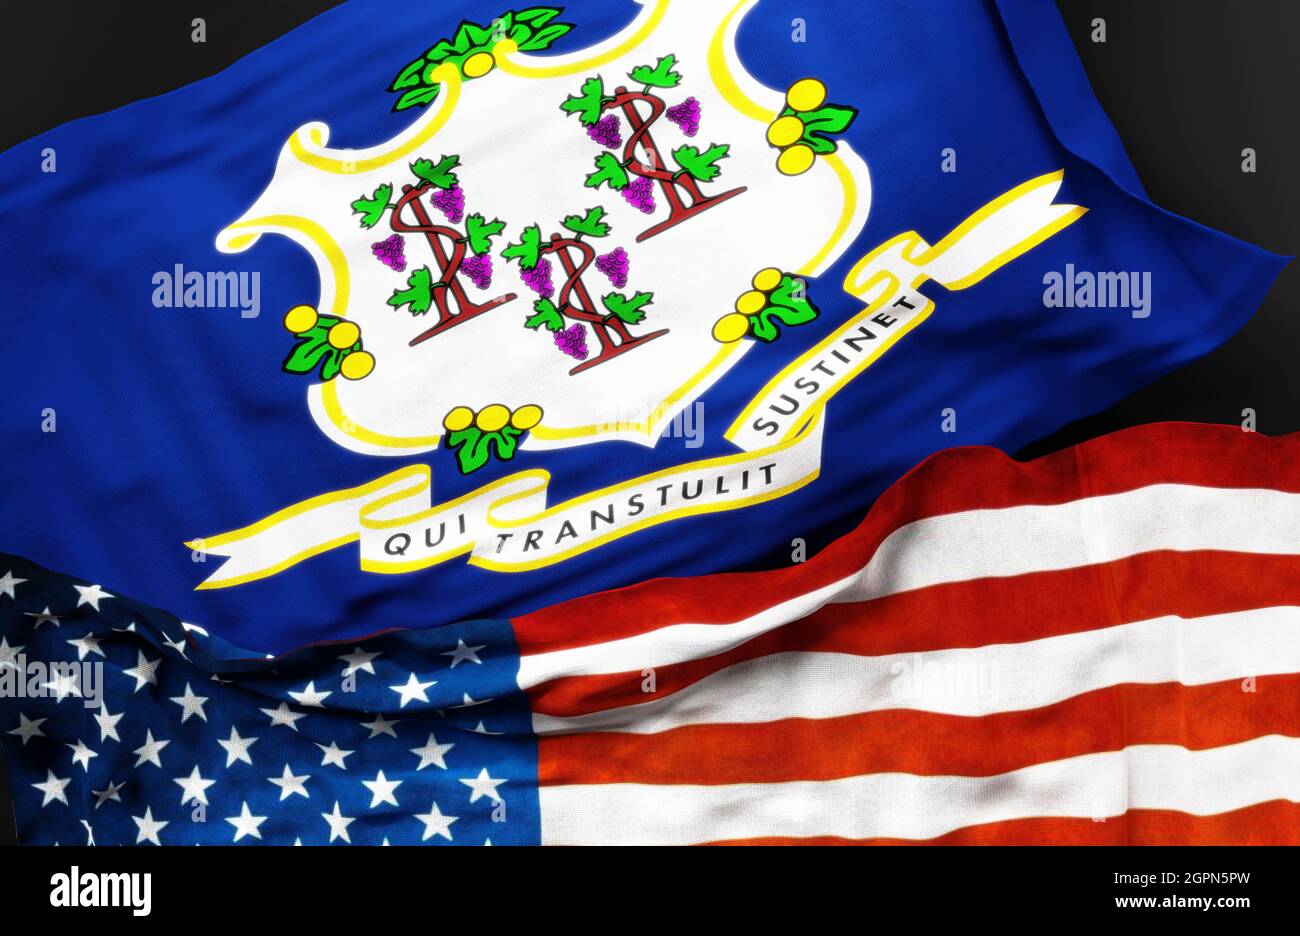 Flag of Connecticut along with a flag of the United States of America as a symbol of unity between them, 3d illustration Stock Photo